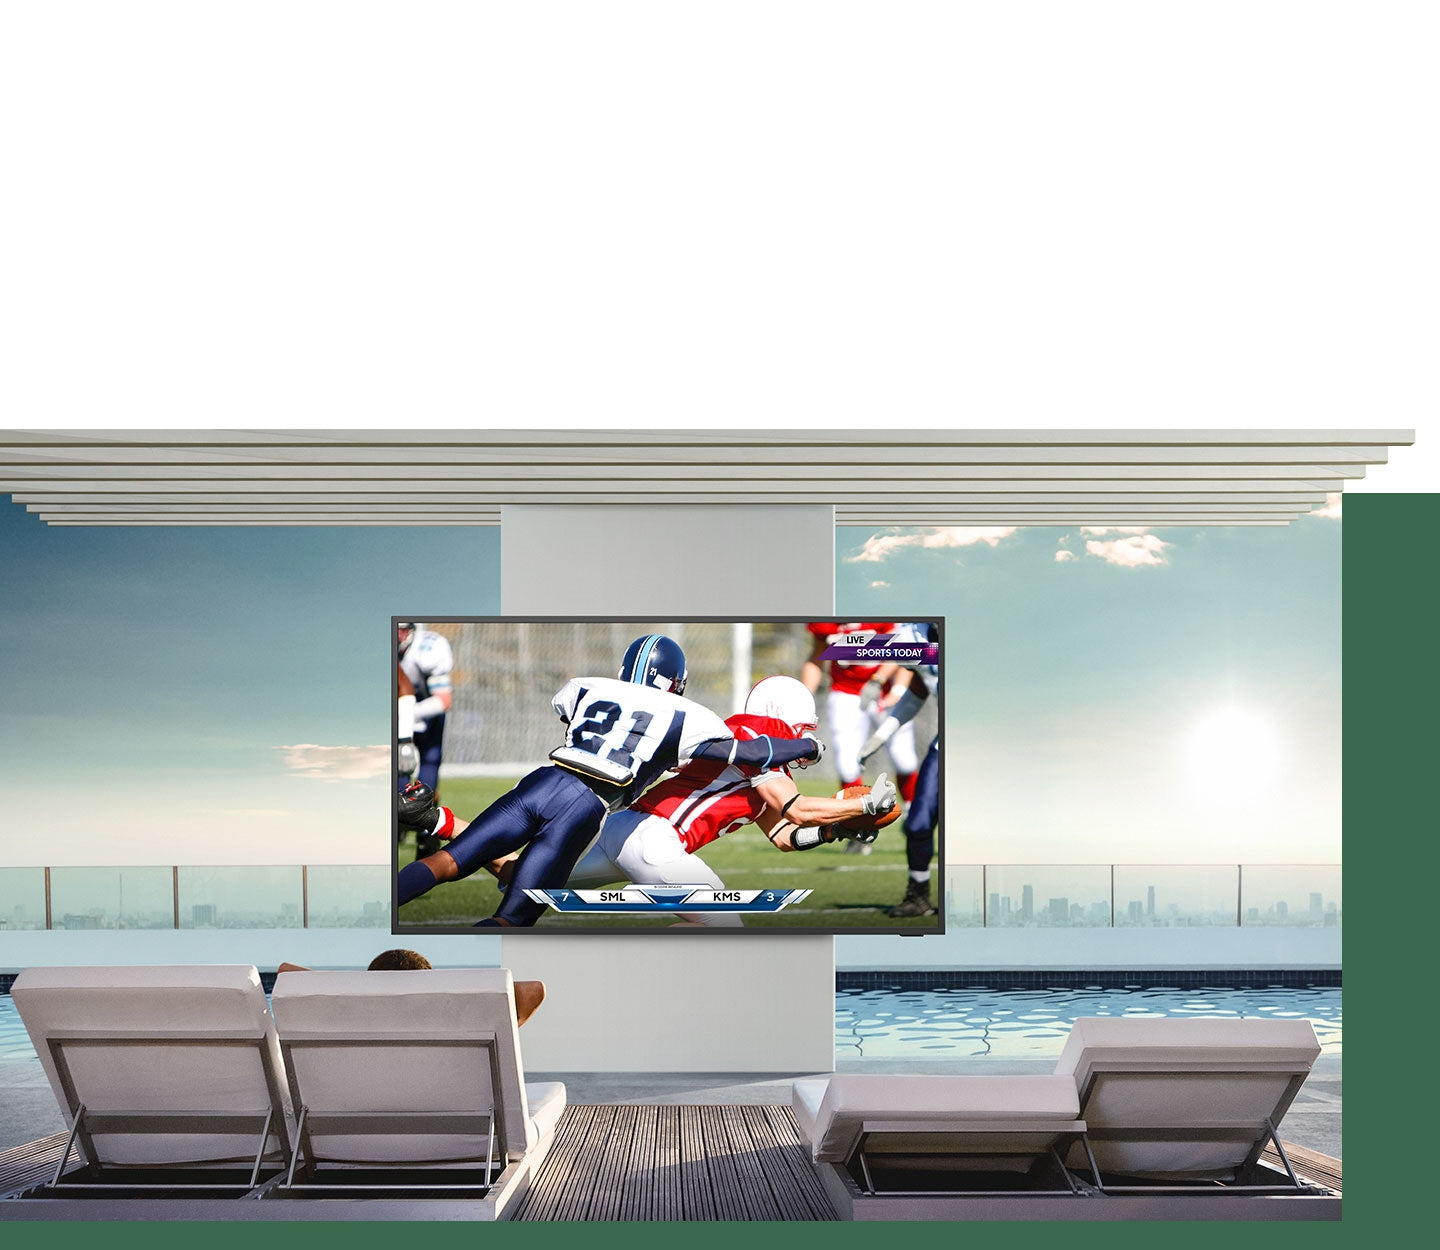 Samsung QE75LST7TCUXXU 75" The Terrace QLED 4K HDR Smart Outdoor